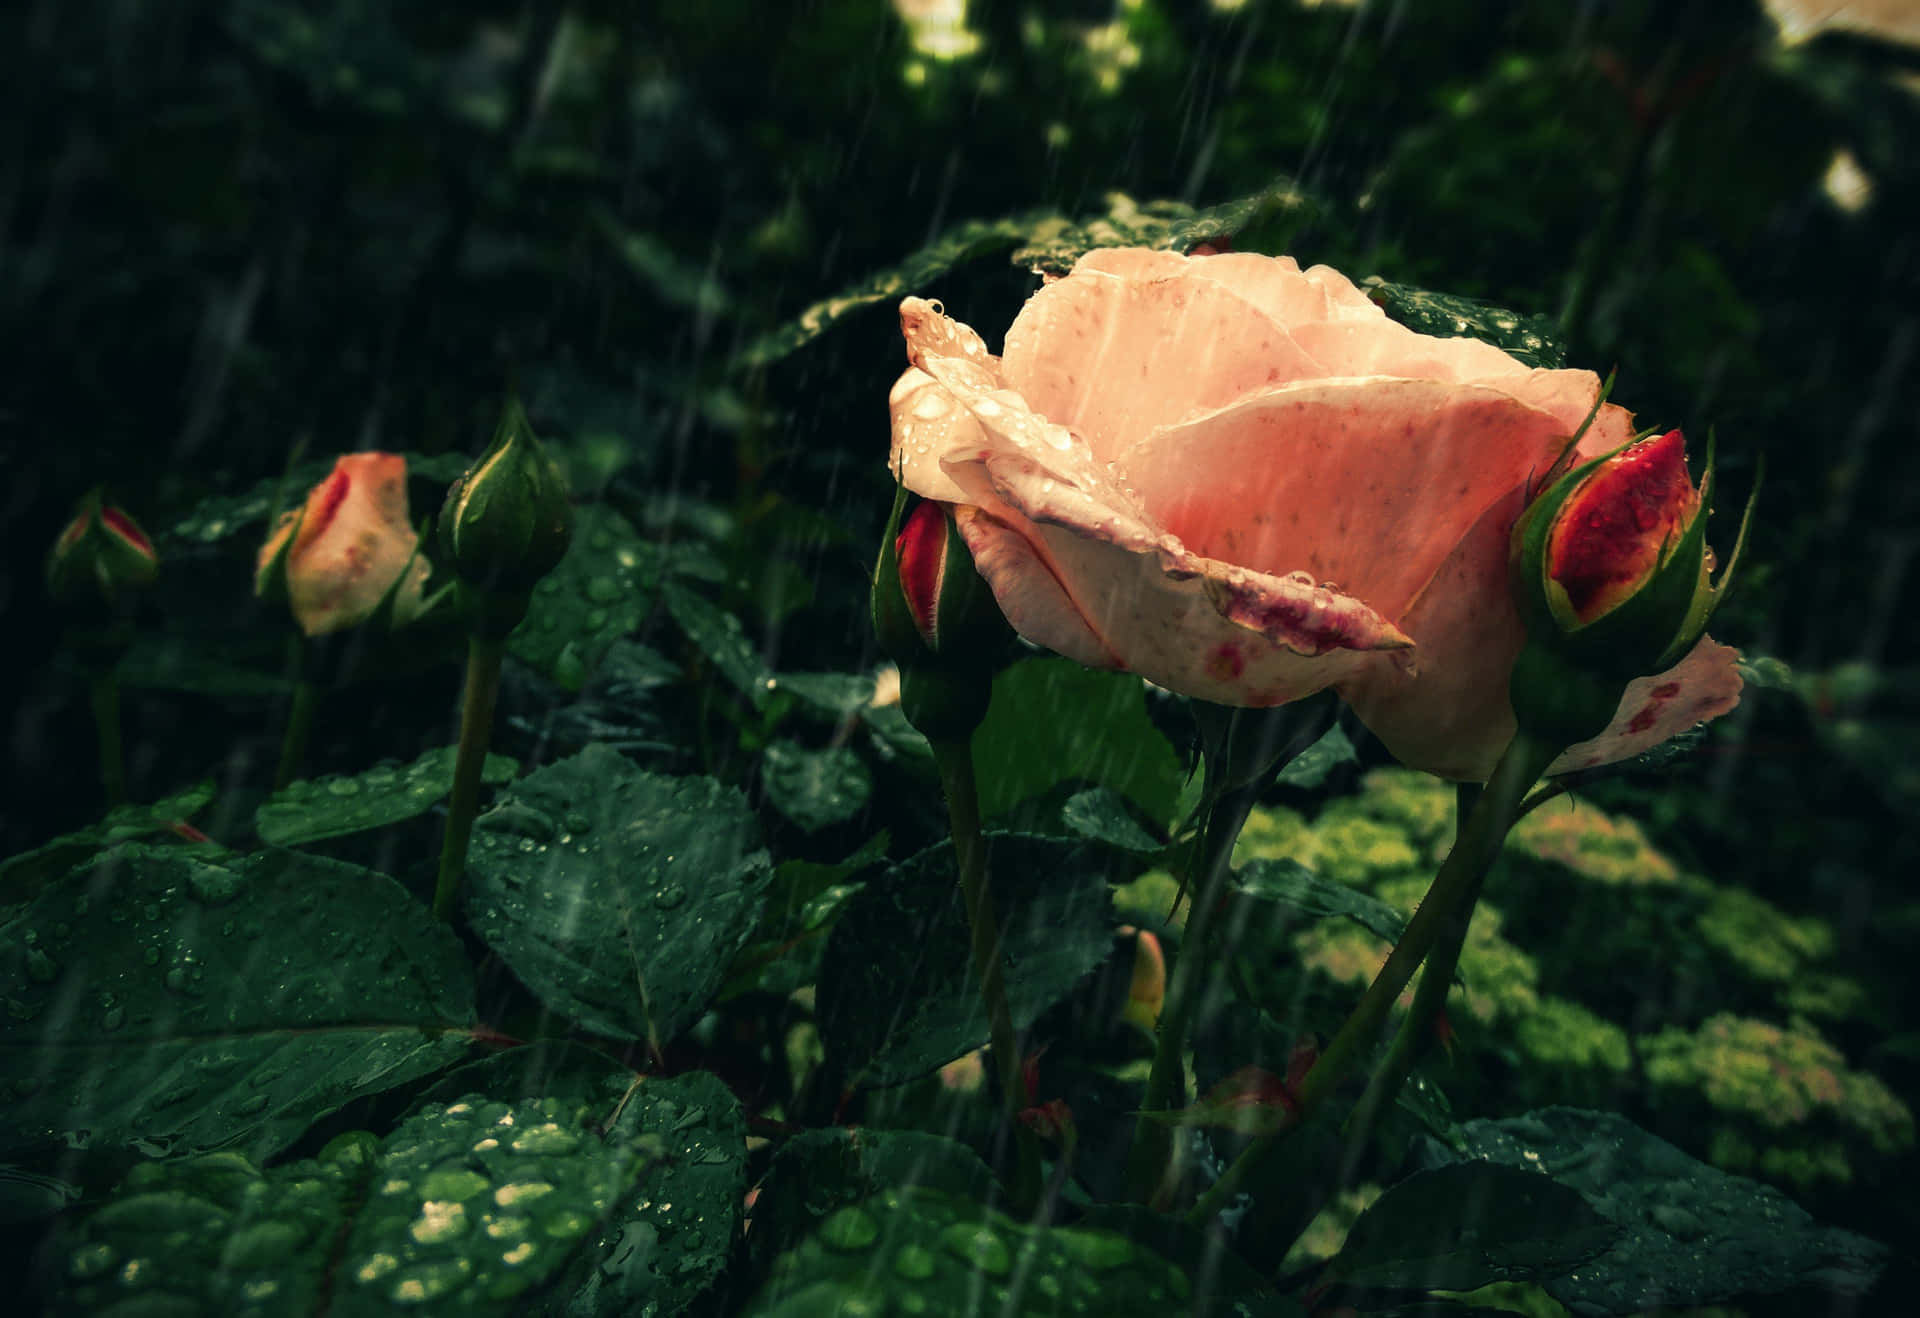 A stunning rose drenched in raindrops Wallpaper